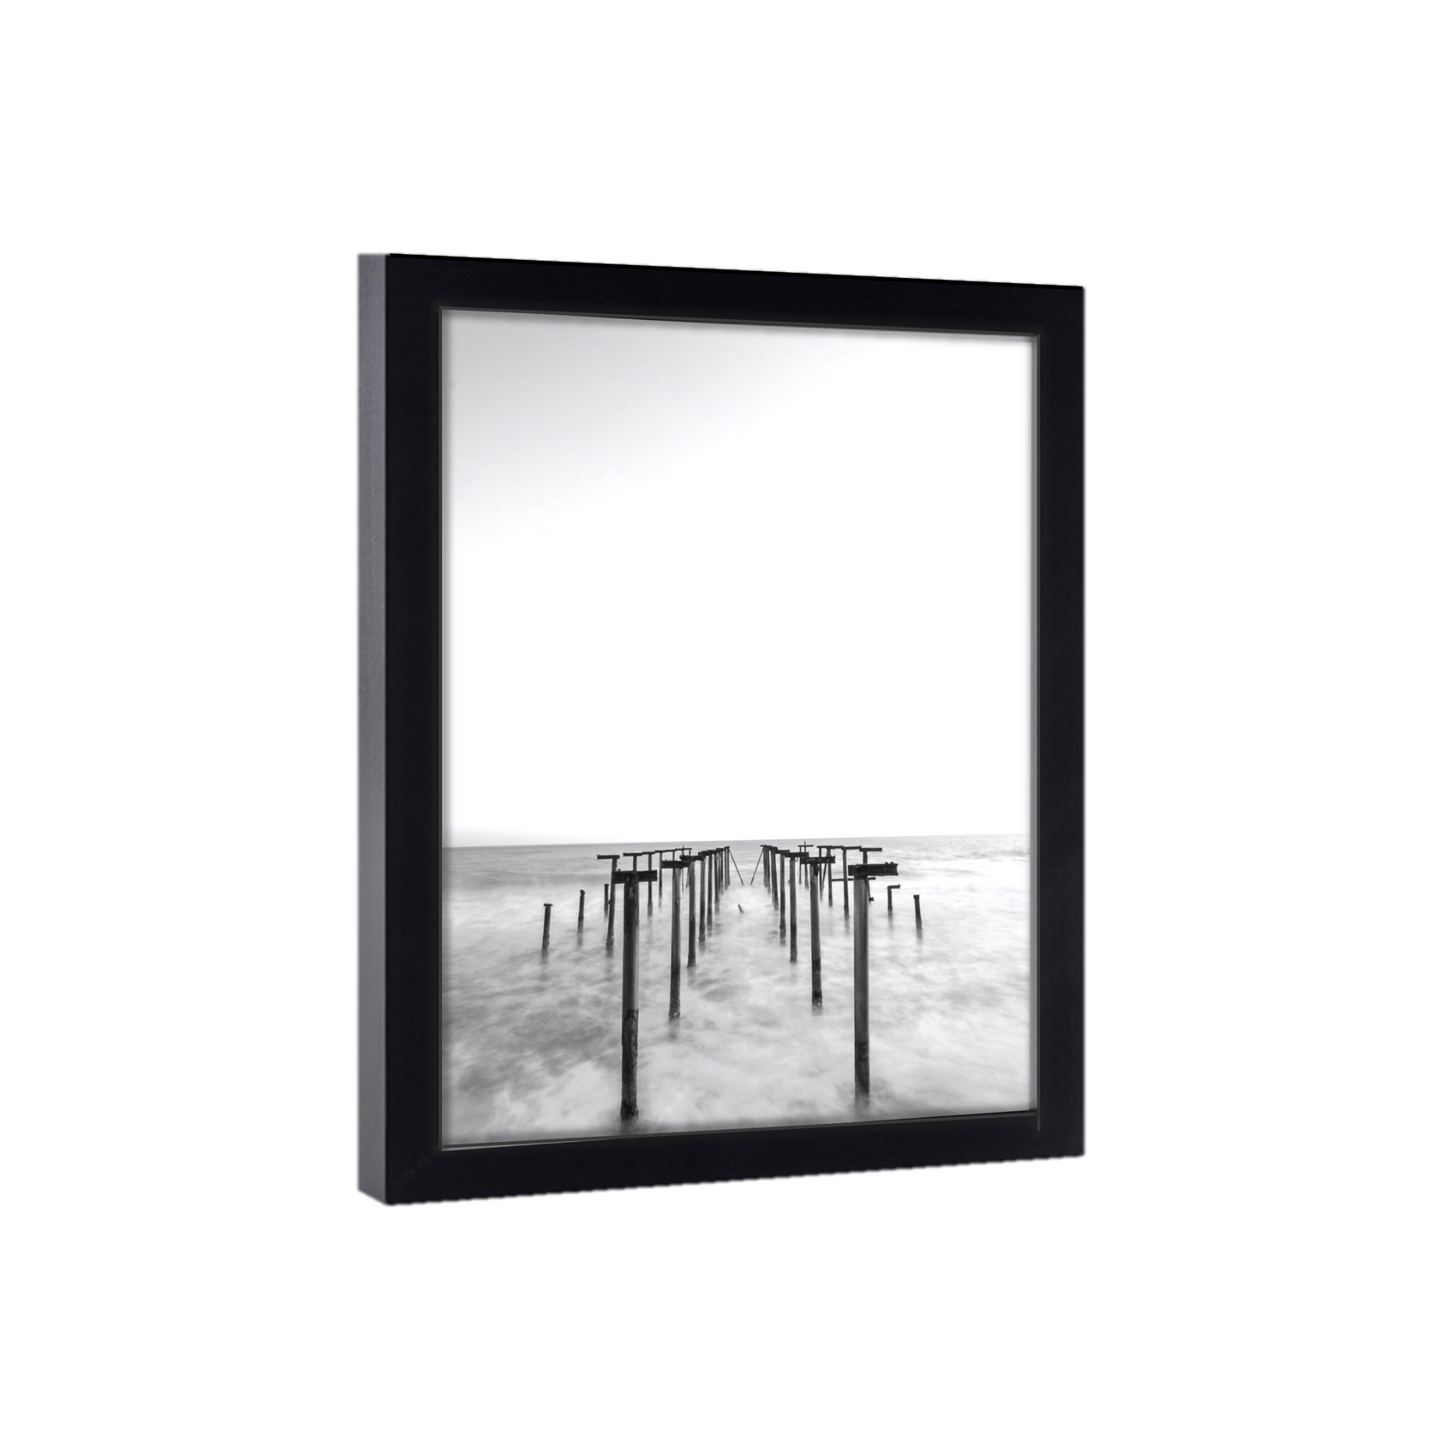 Gallery Wall 8x18 Picture Frame Black Wood 8x18  Poster Size